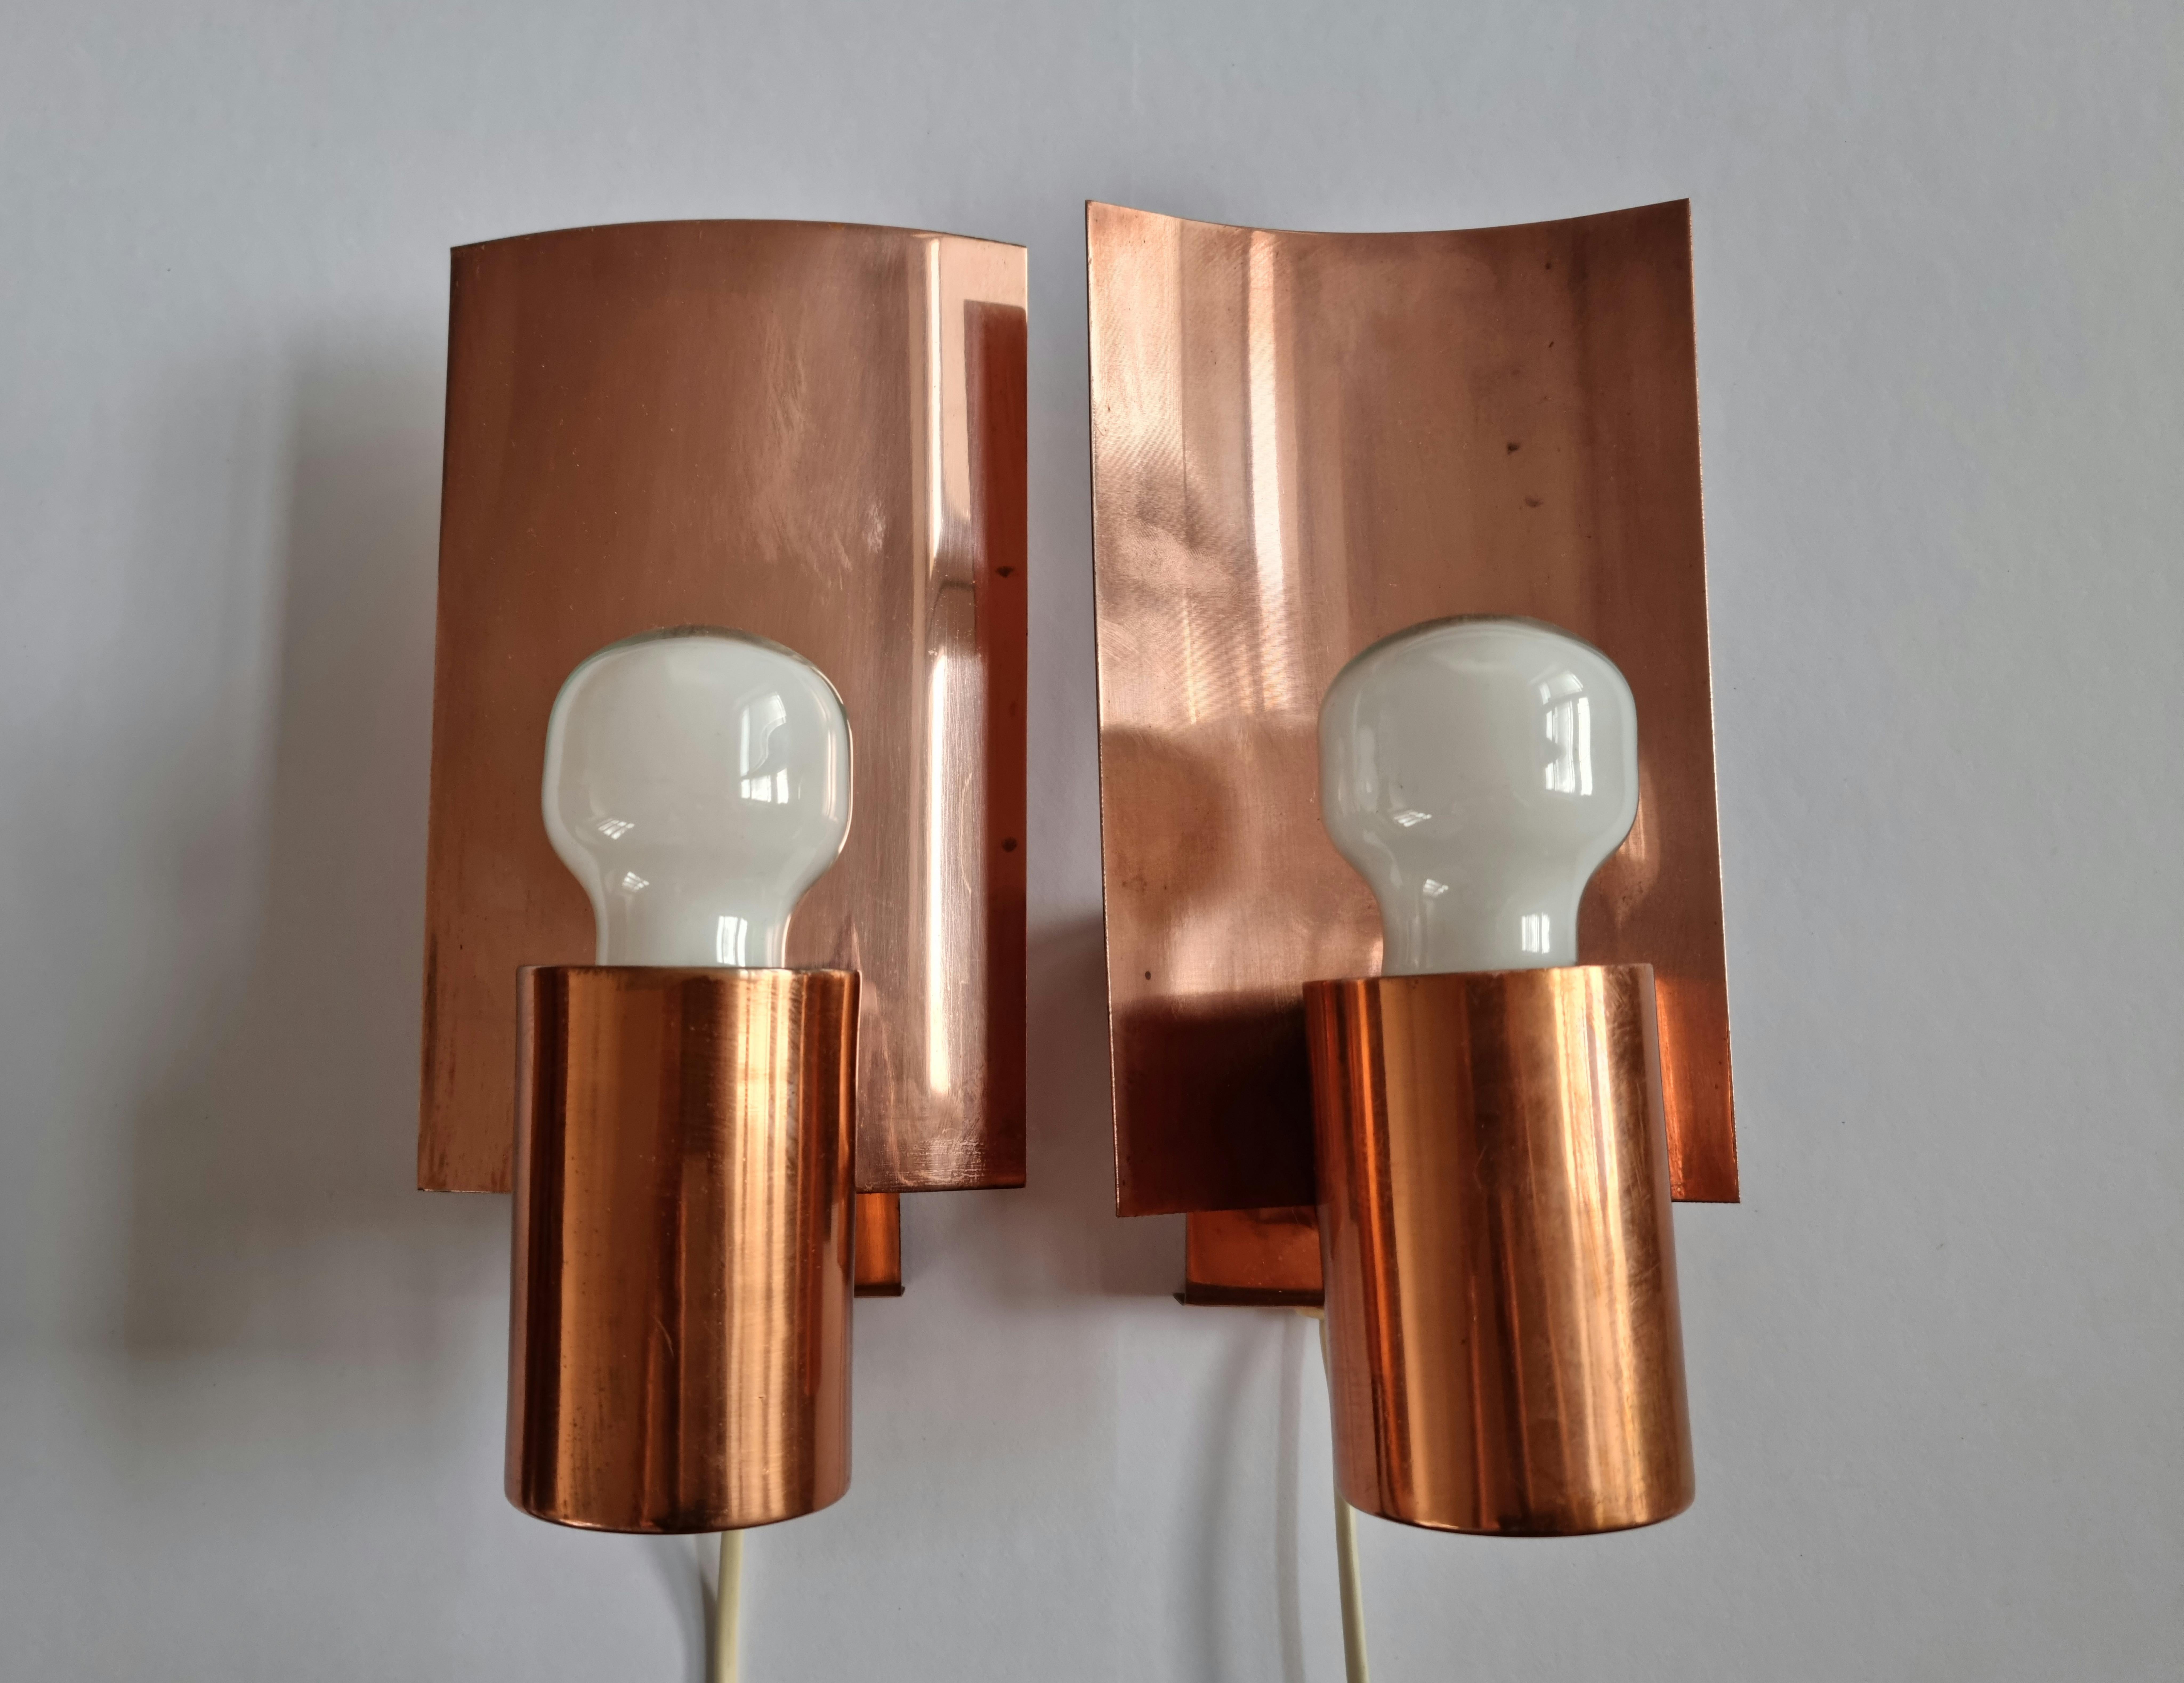 Pair of Midcentury Copper Wall Lamps, Denmark, 1960s For Sale 3